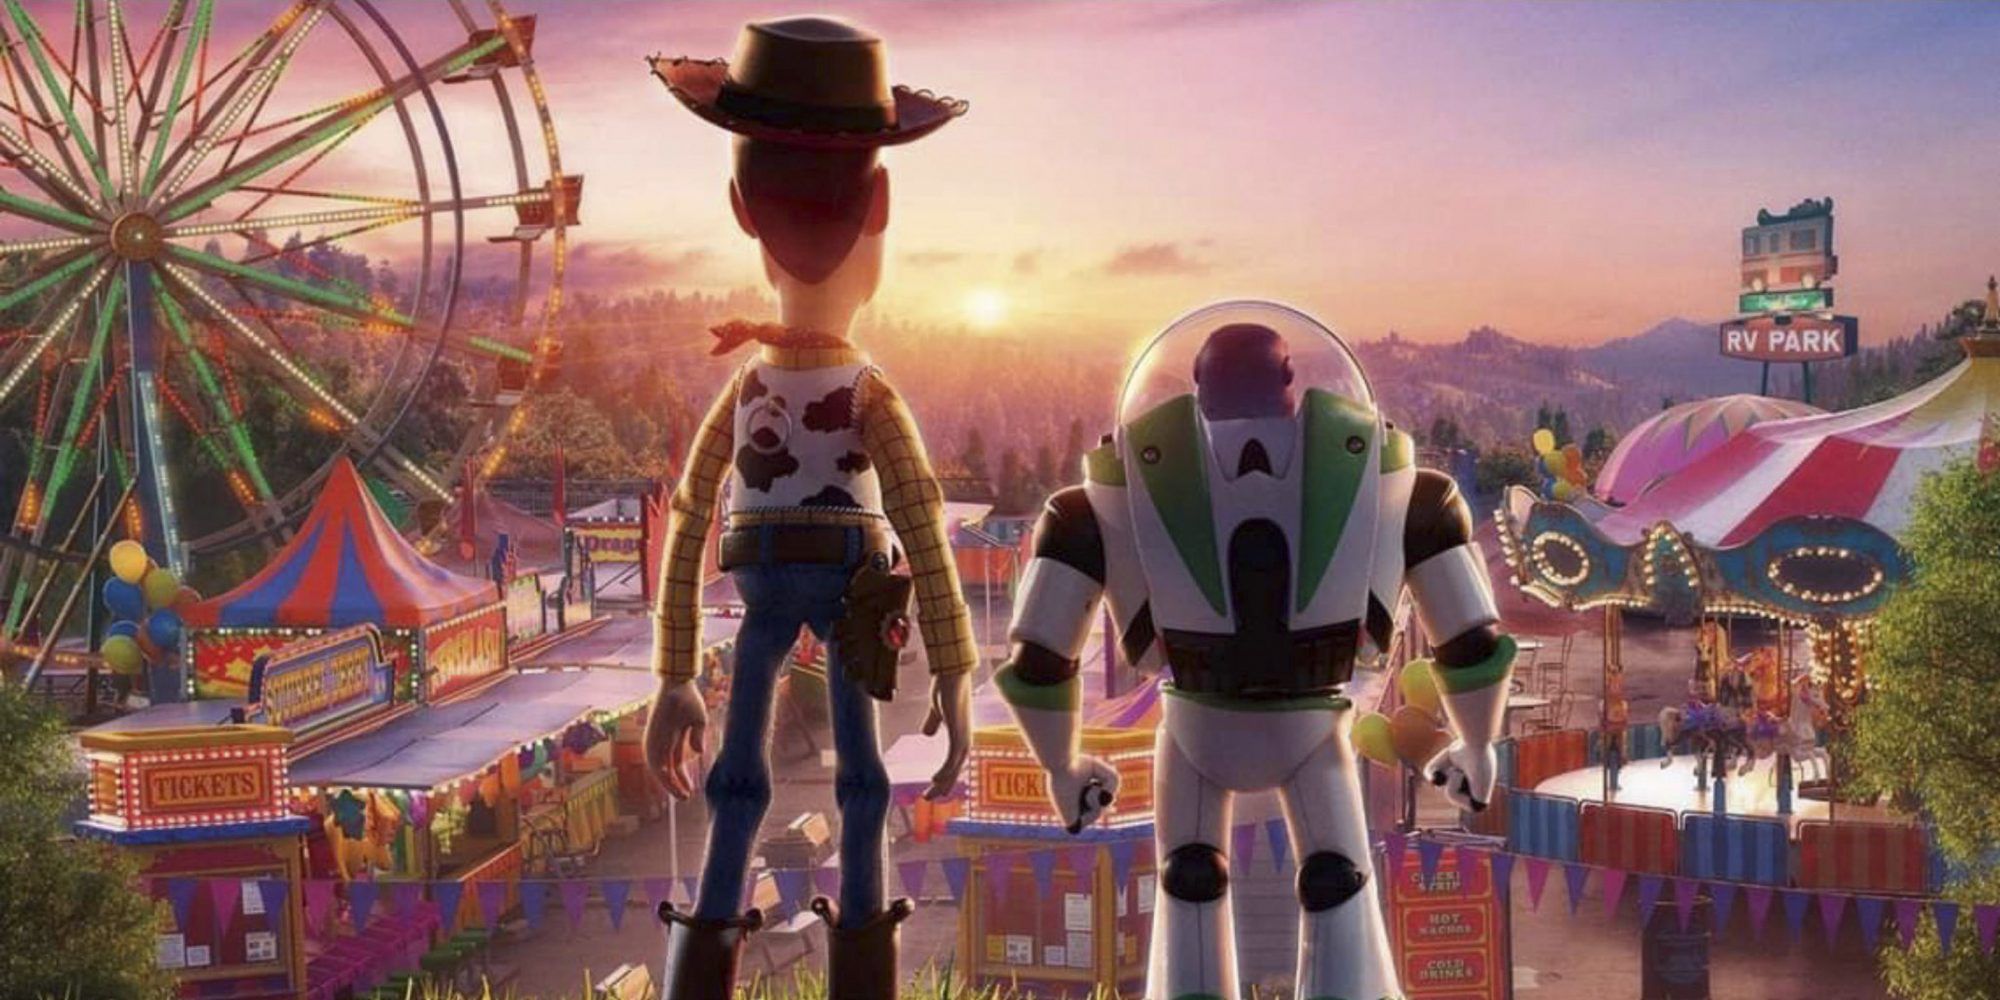 Toy Story 5 Announced By Disney, Why? & Where Does The Story Go